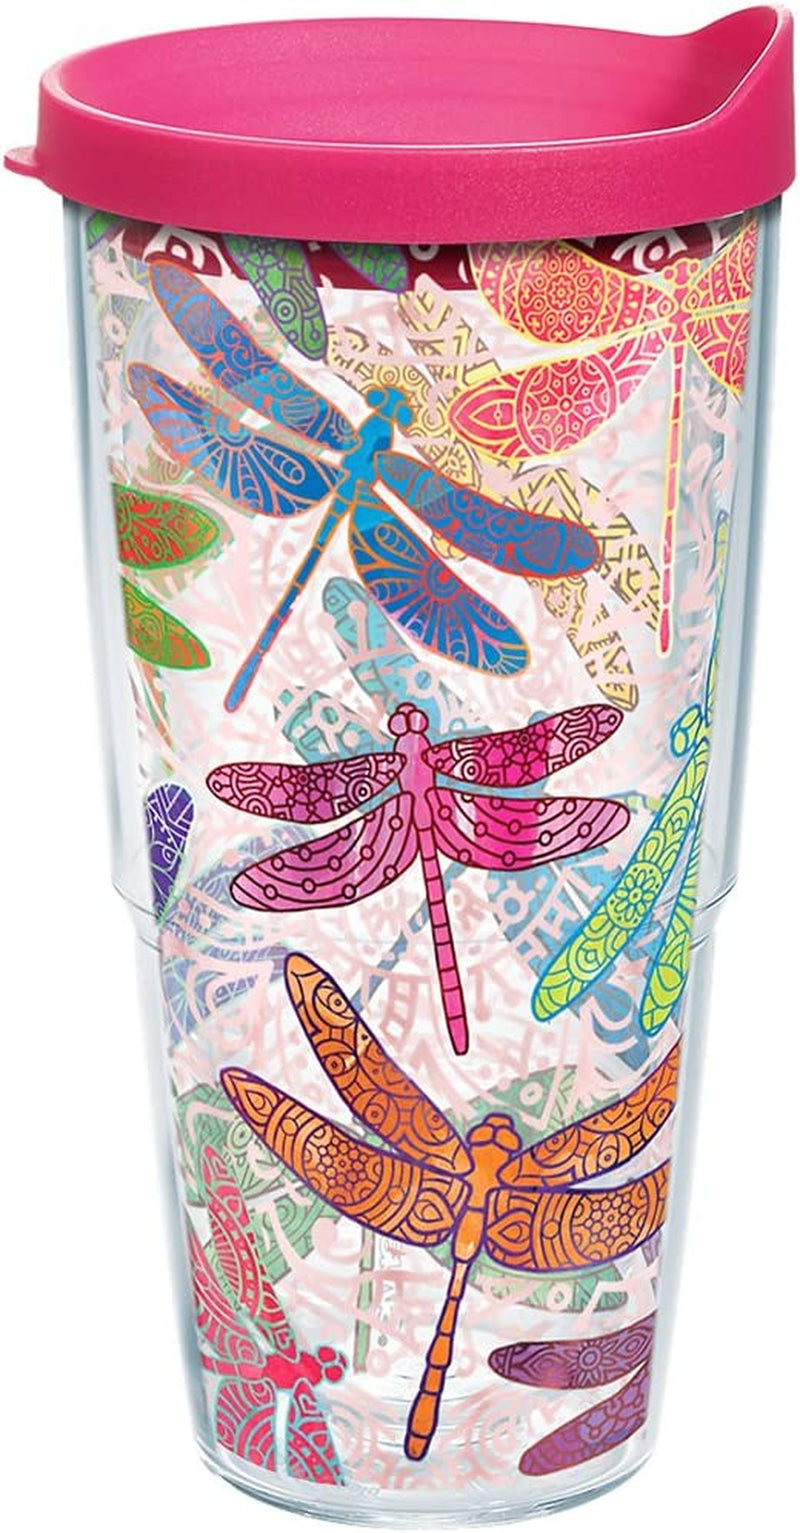 Tervis Made in USA Double Walled Dragonfly Mandala Insulated Tumbler Cup Keeps Drinks Cold & Hot, 24Oz, Classic